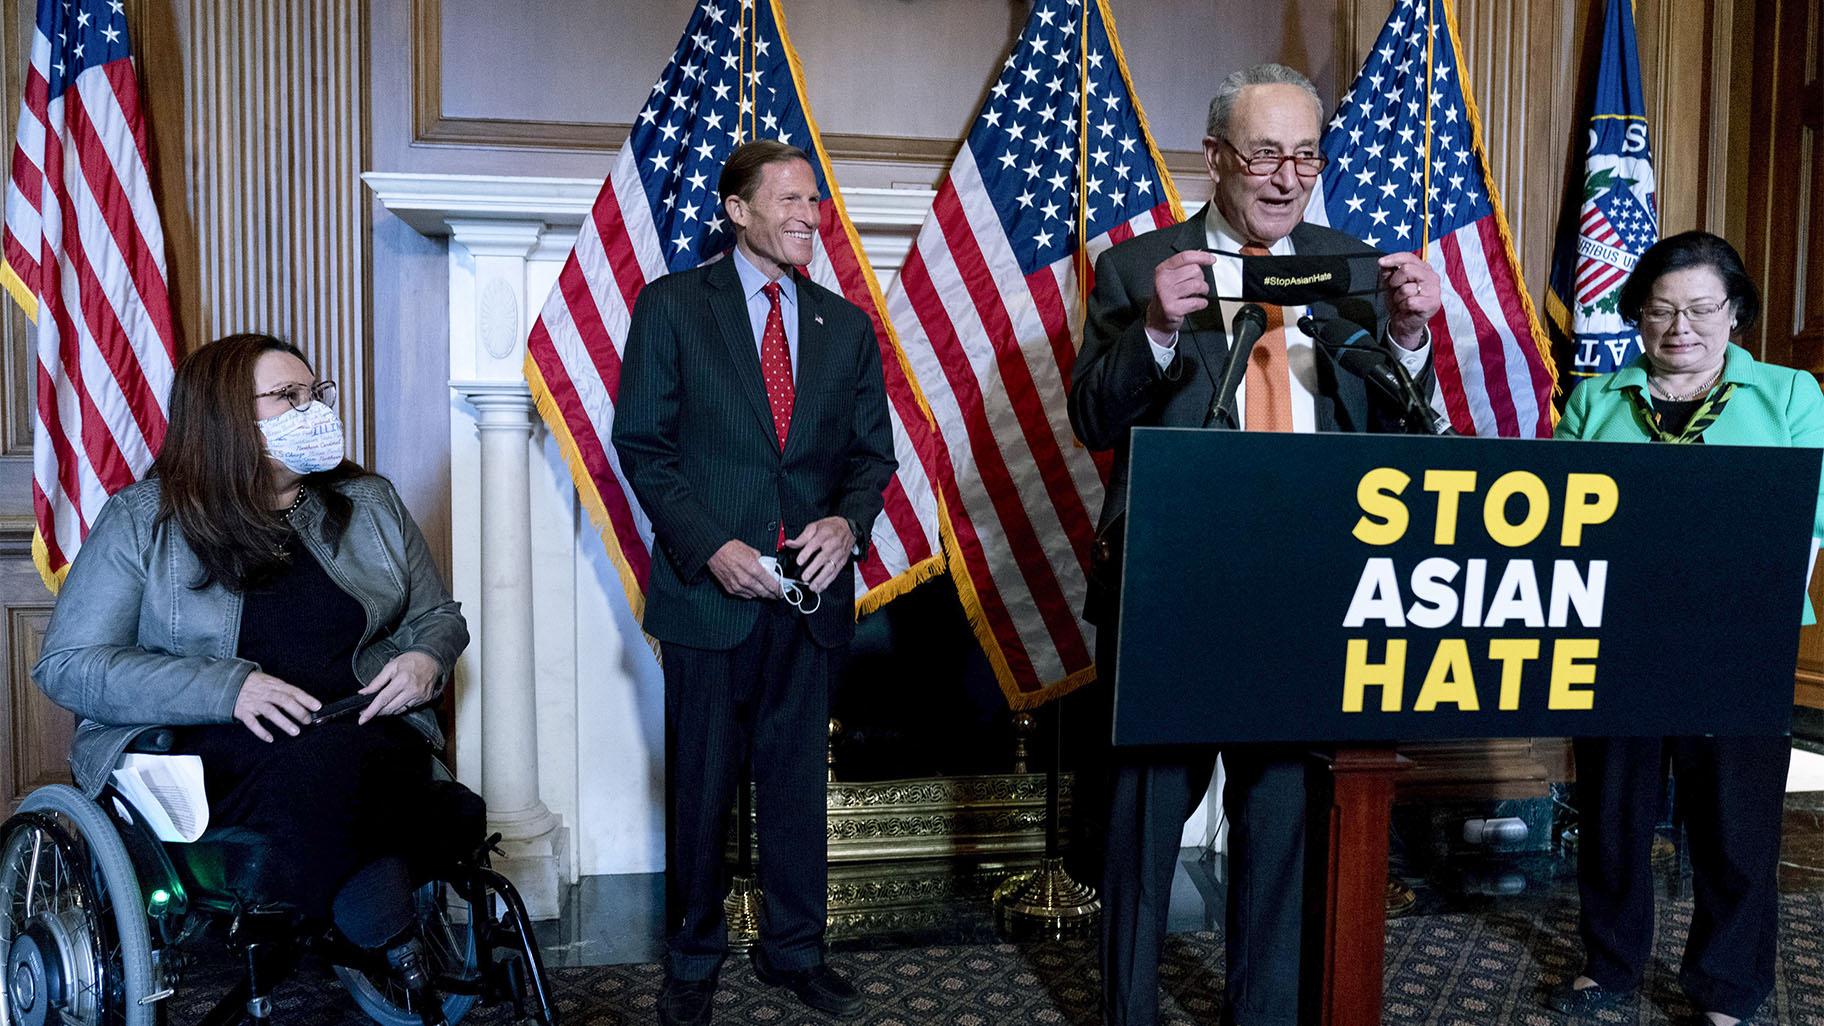 Senate Majority Leader Chuck Schumer of N.Y., accompanied by Sen. Mazie Hirono, D-Hawaii, Sen. Tammy Duckworth, D-Ill., and Sen. Richard Blumenthal, D-Conn., speaks at a news conference after the Senate passed a COVID-19 Hate Crimes Act on Capitol Hill, Thursday, April 22, 2021, in Washington. (AP Photo / Andrew Harnik)